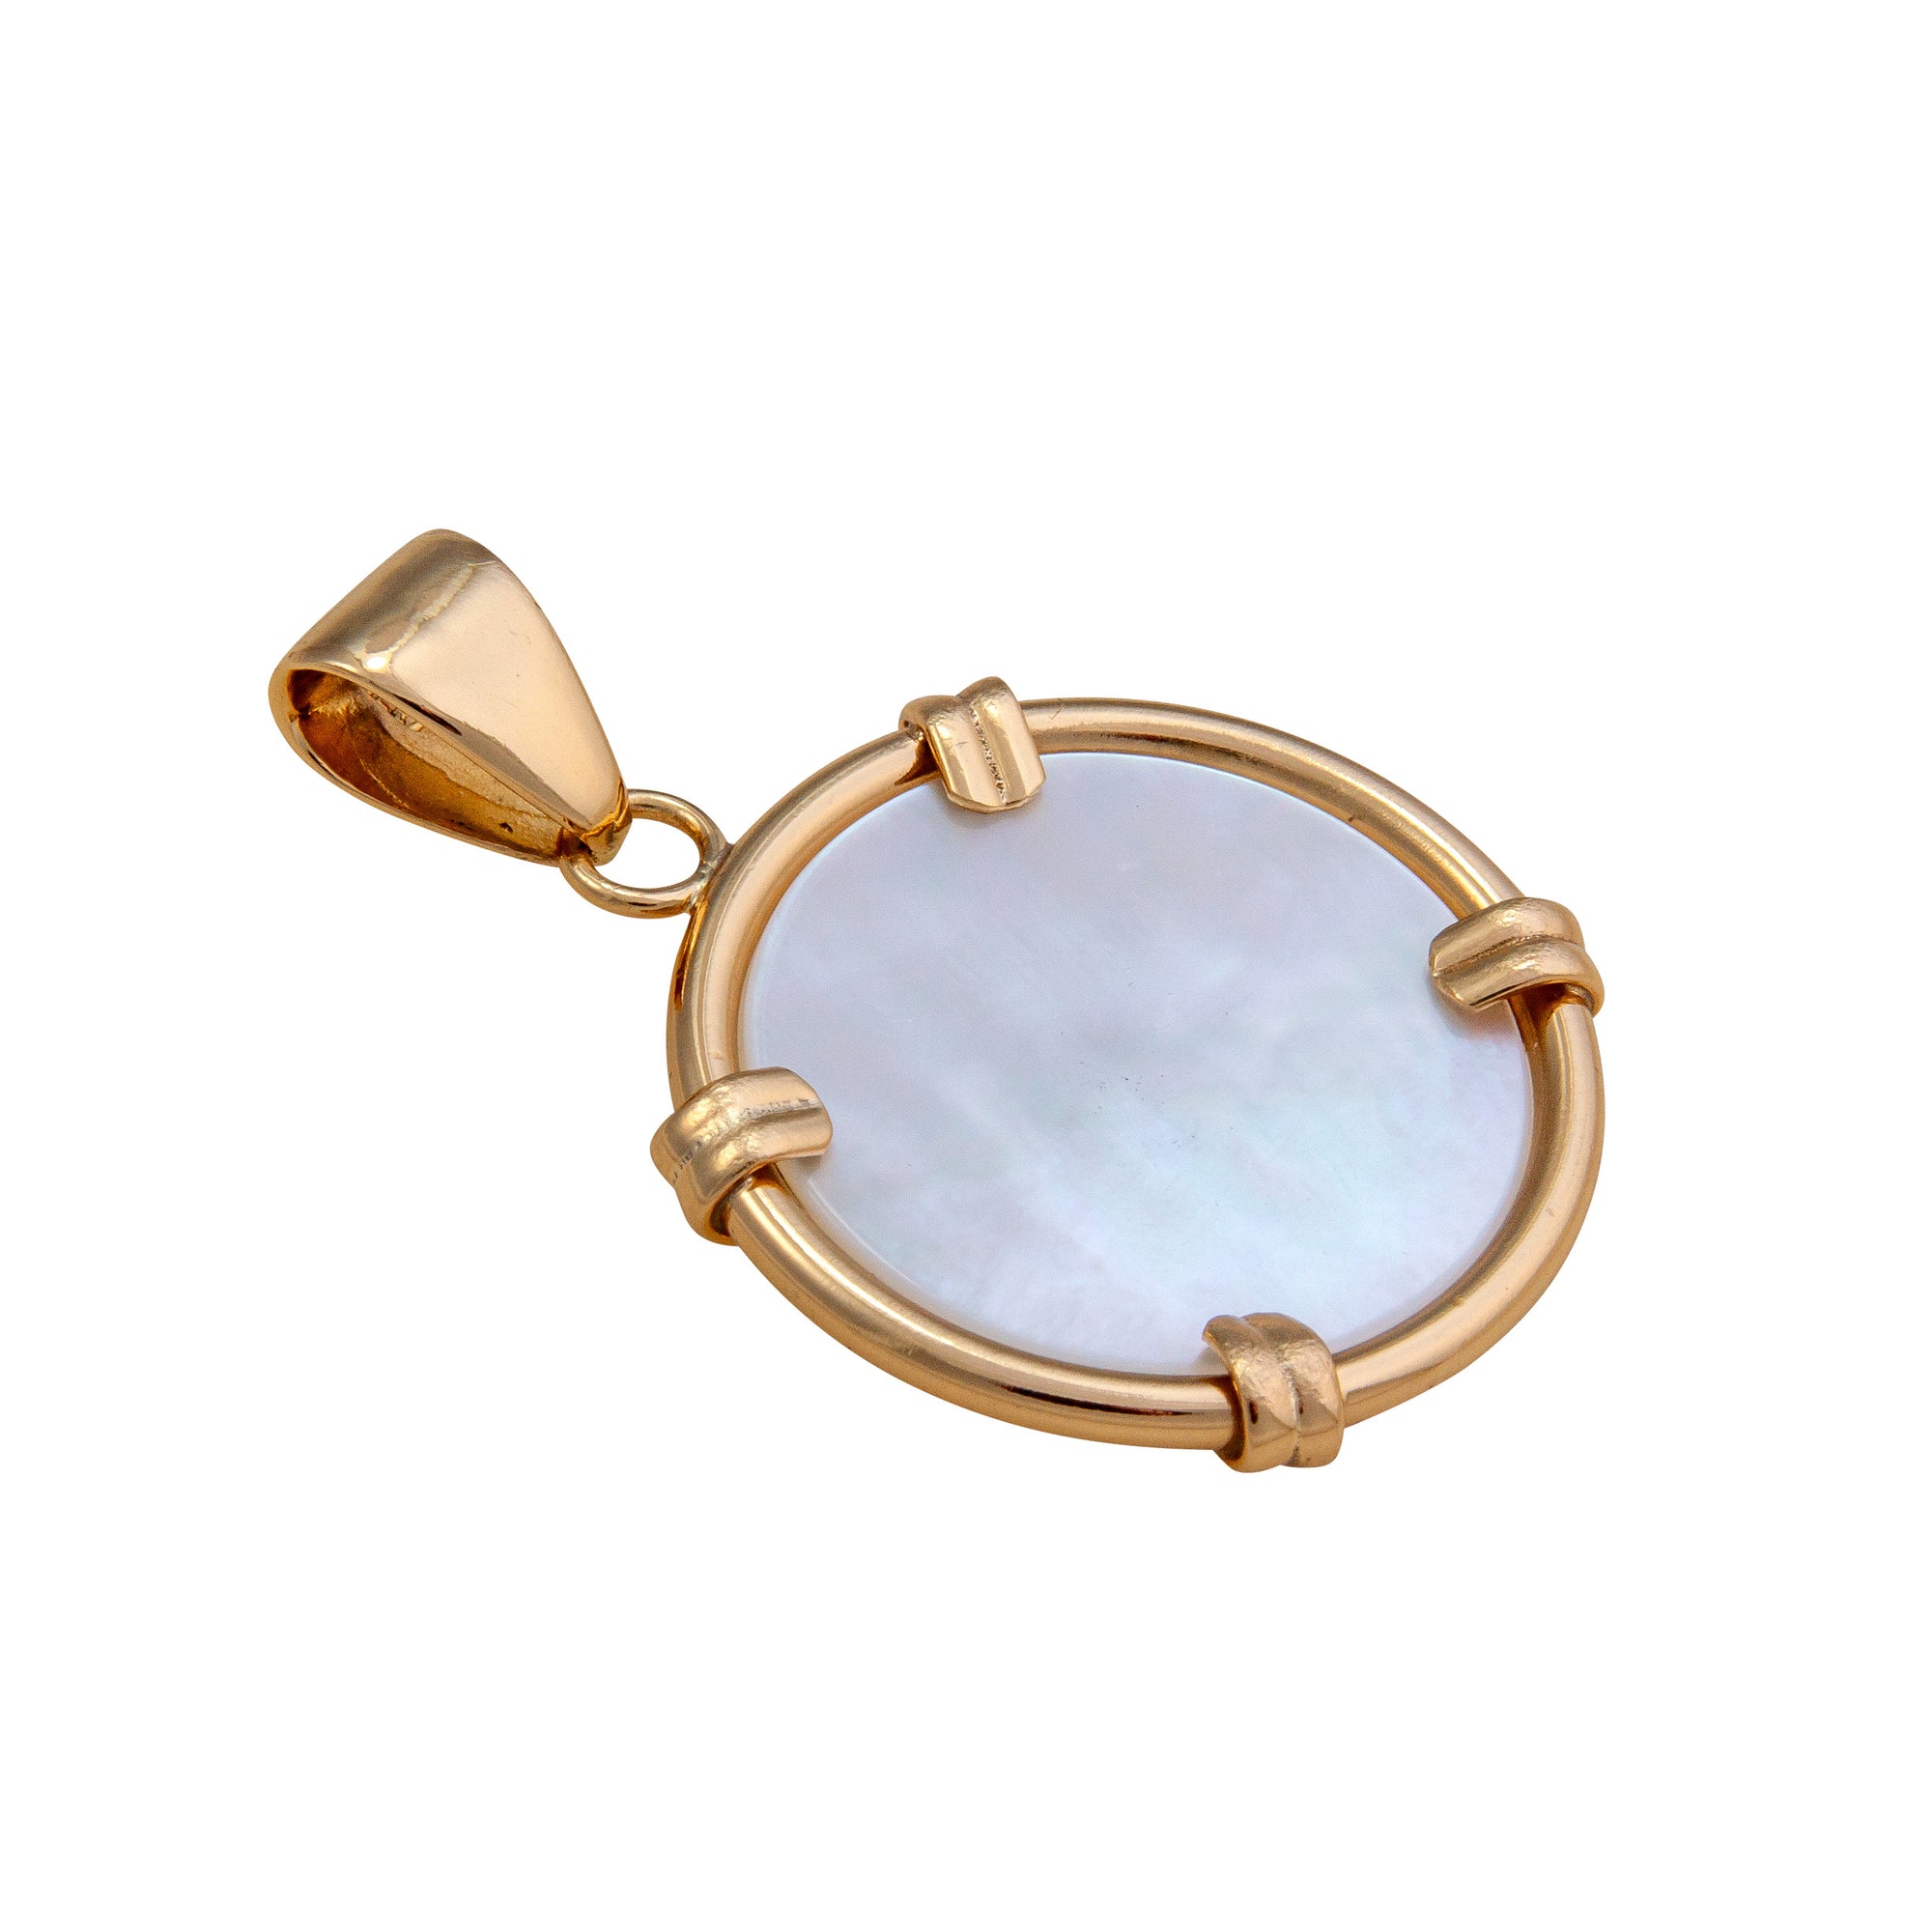 Alchemia Mother of Pearl Prong Pendant - Large | Charles Albert Jewelry